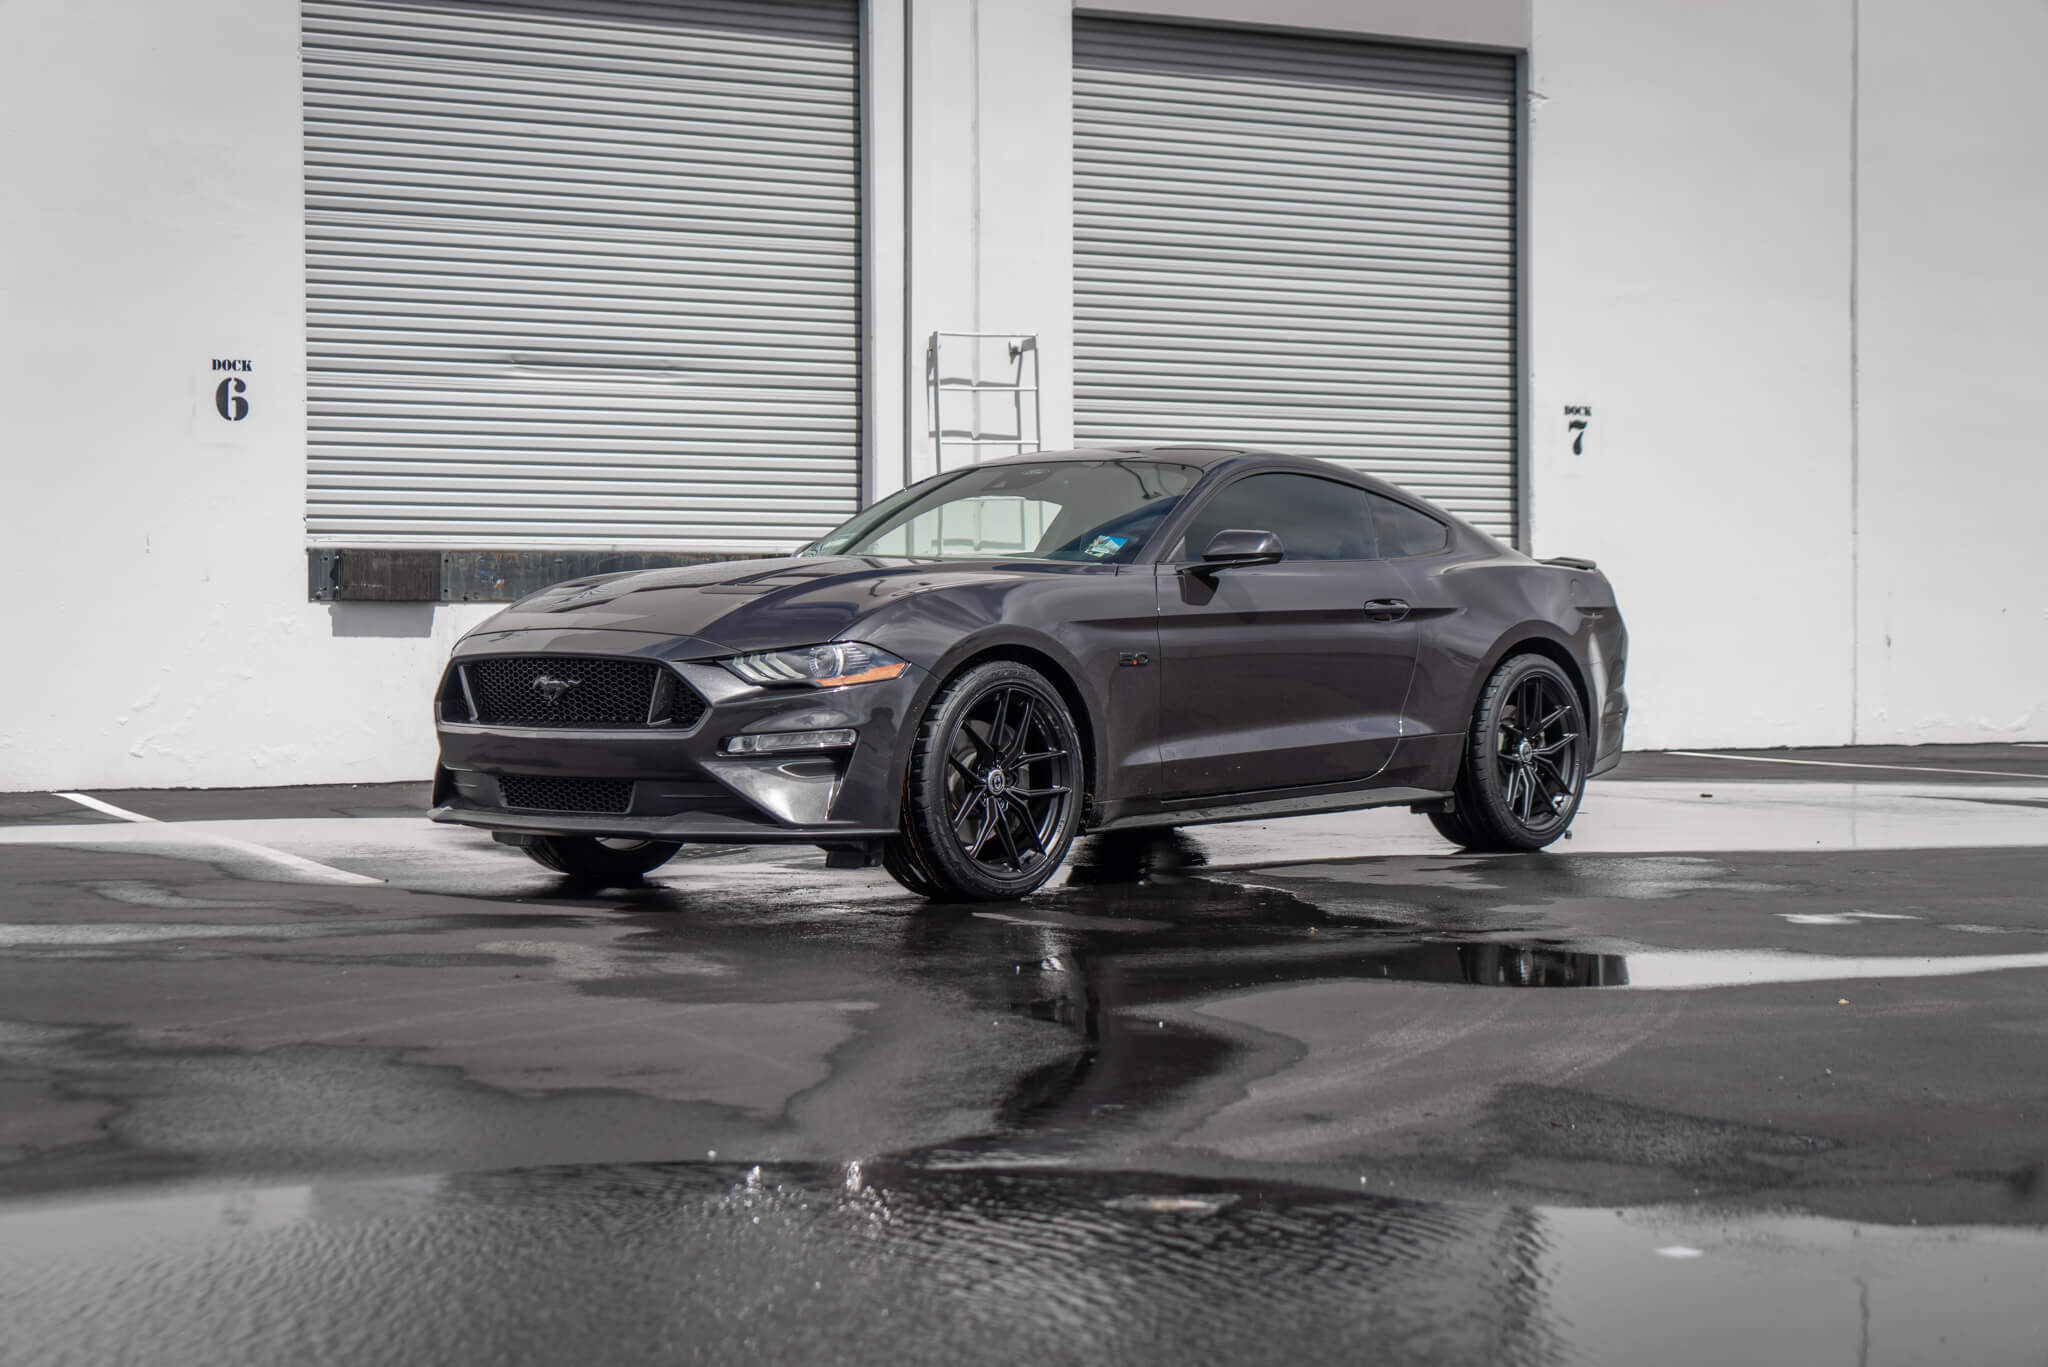 S650 Mustang HRE Holiday Sale Ends DEC 31st - LIMITED STOCK - Vibe Motorsports 1